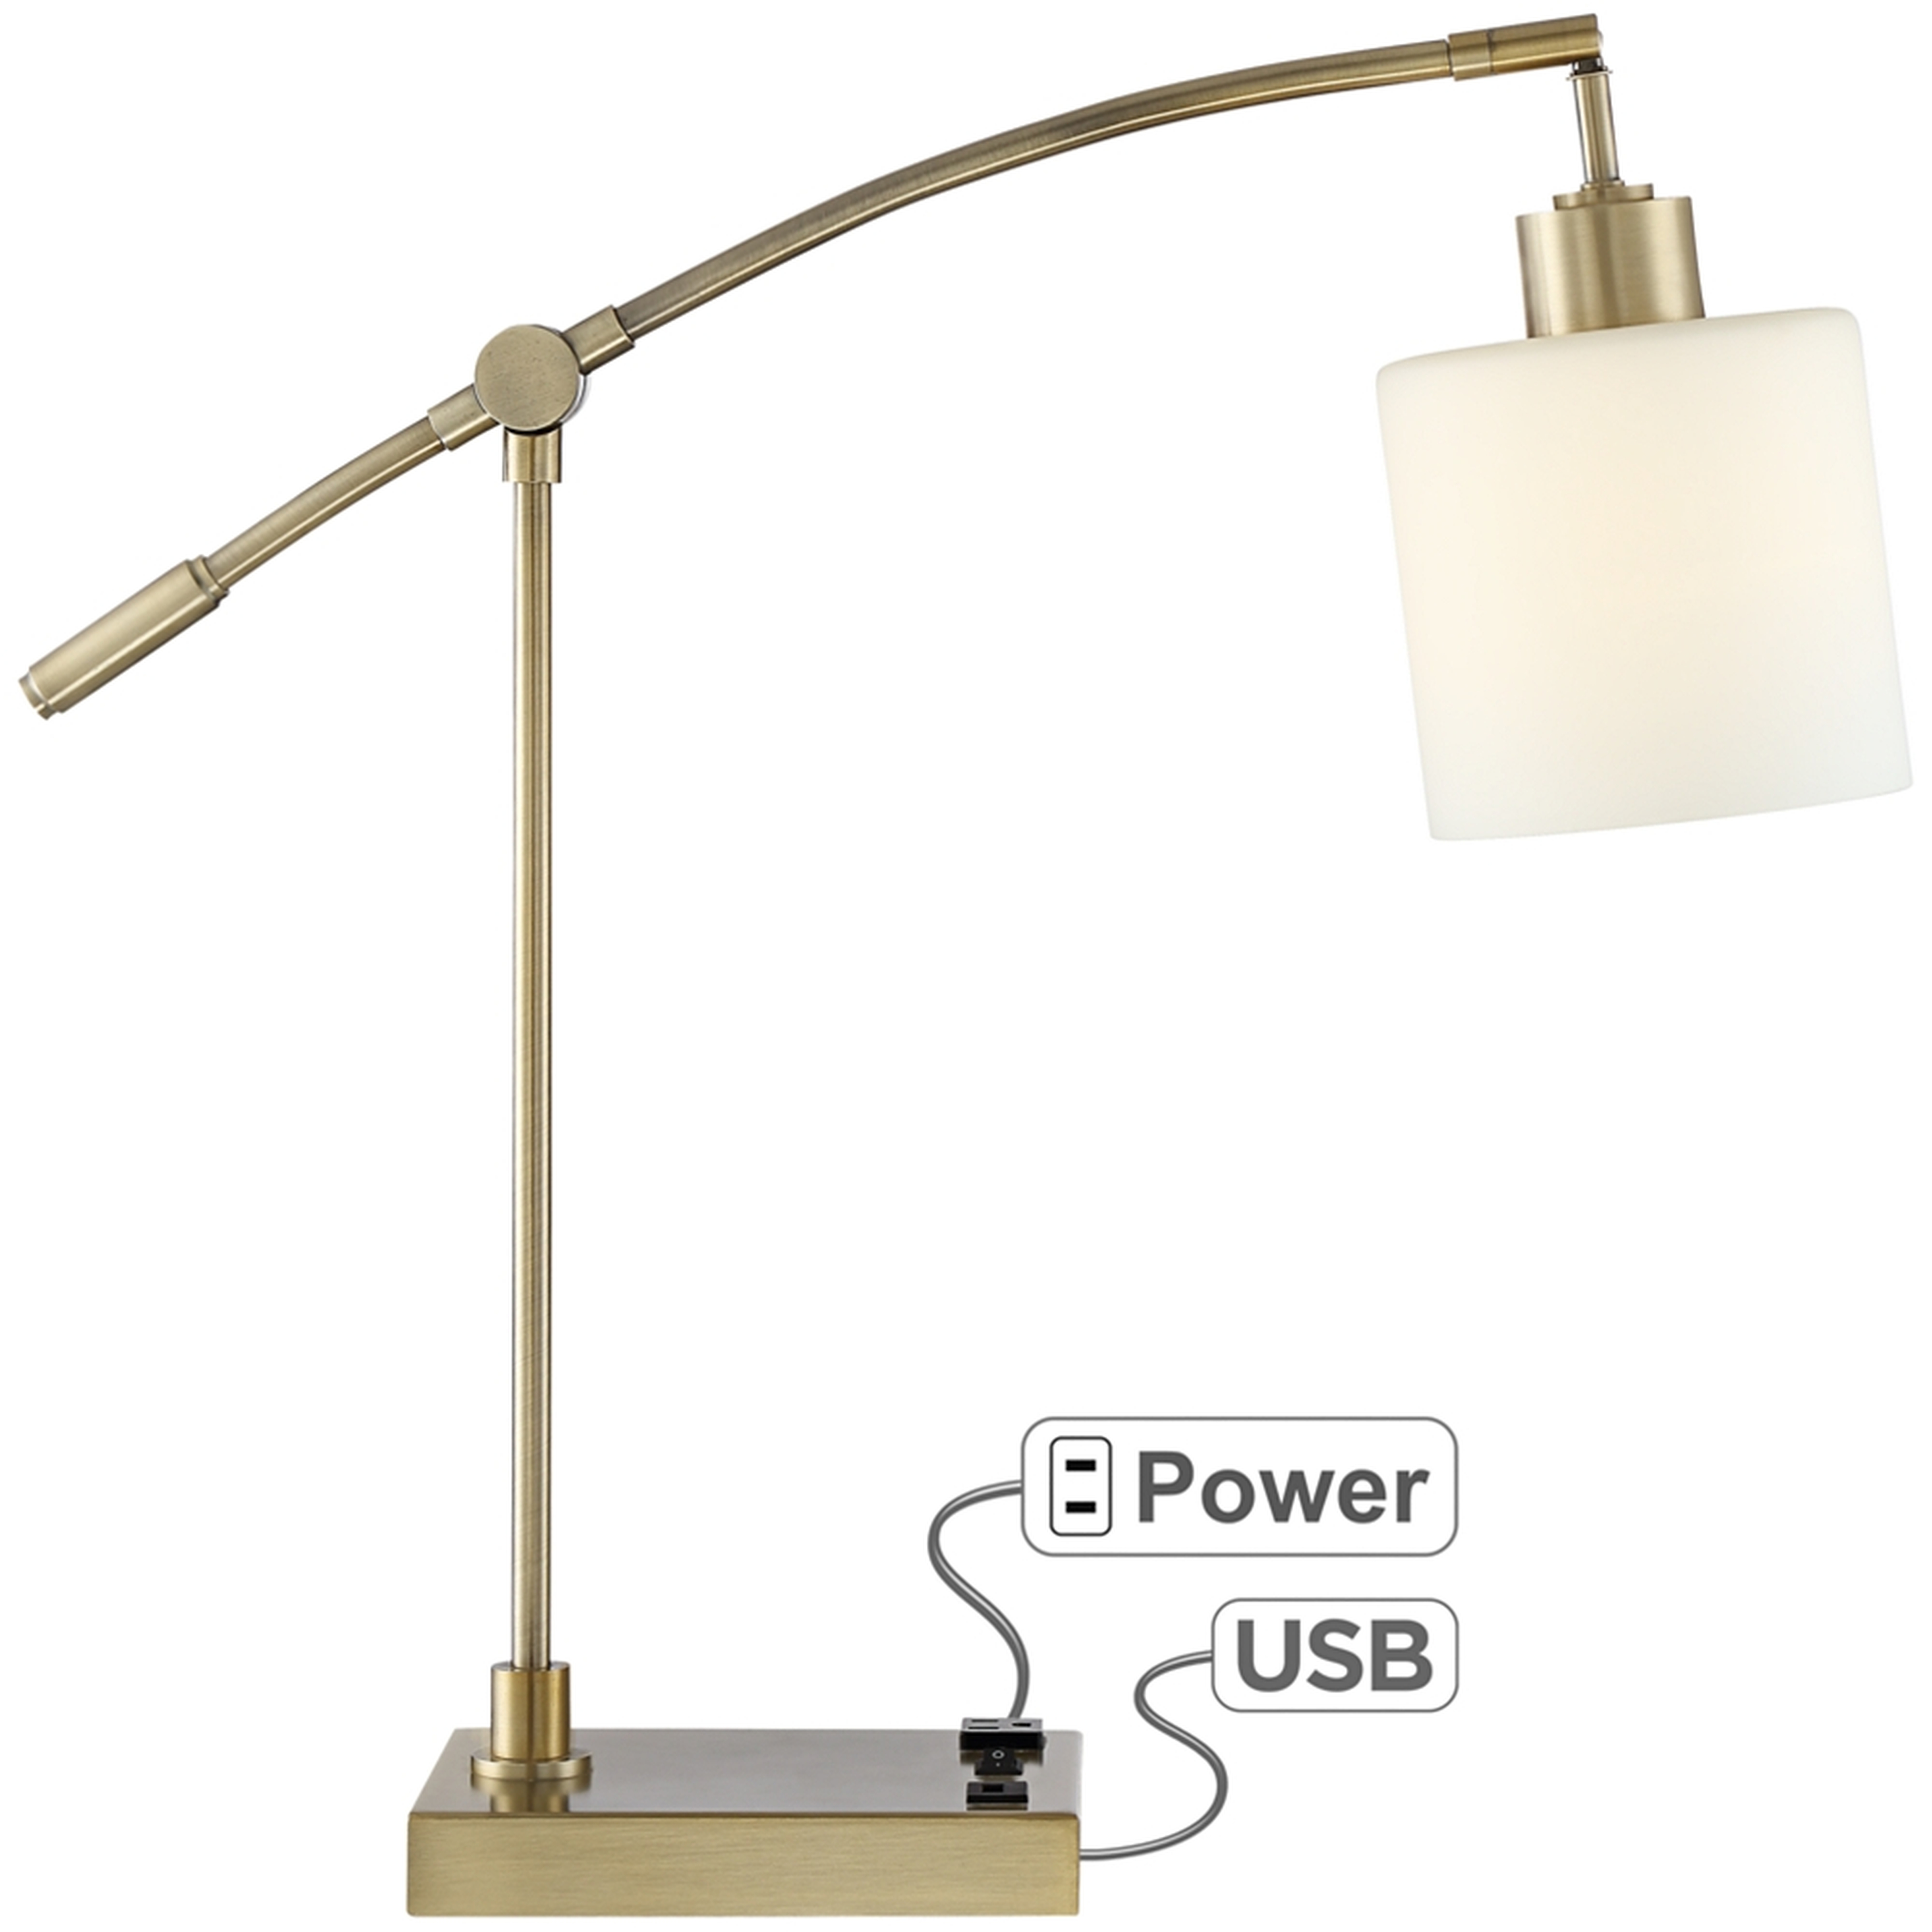 Kipling Desk Lamp with Oulet and USB Port - Style # 43A15 - Lamps Plus